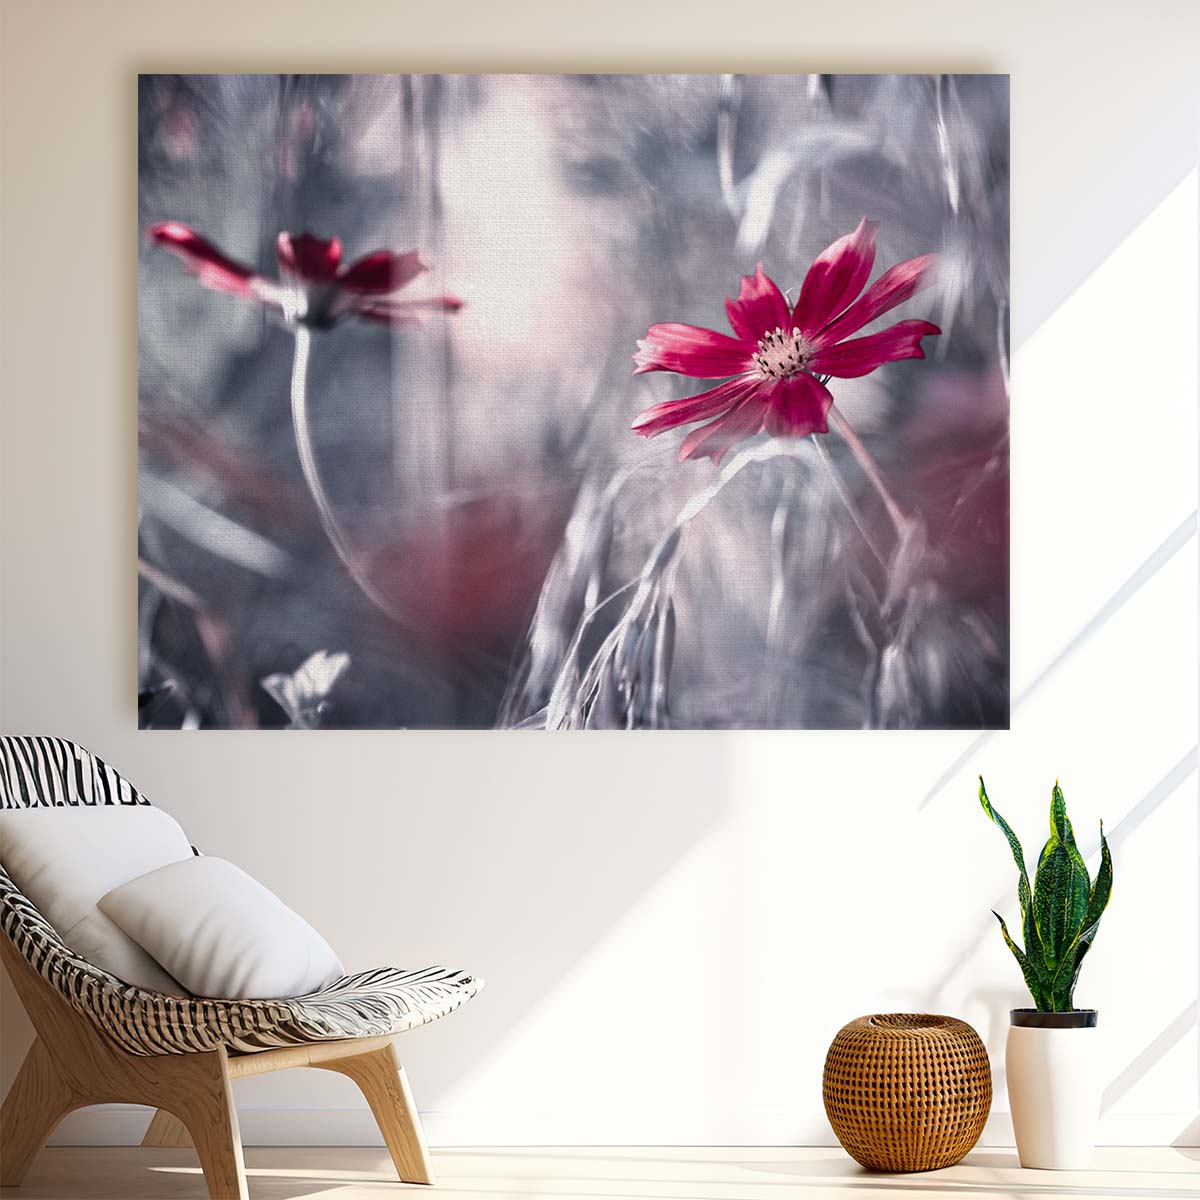 Red Cosmos Flower Macro Photography Romantic Floral Bokeh Wall Art